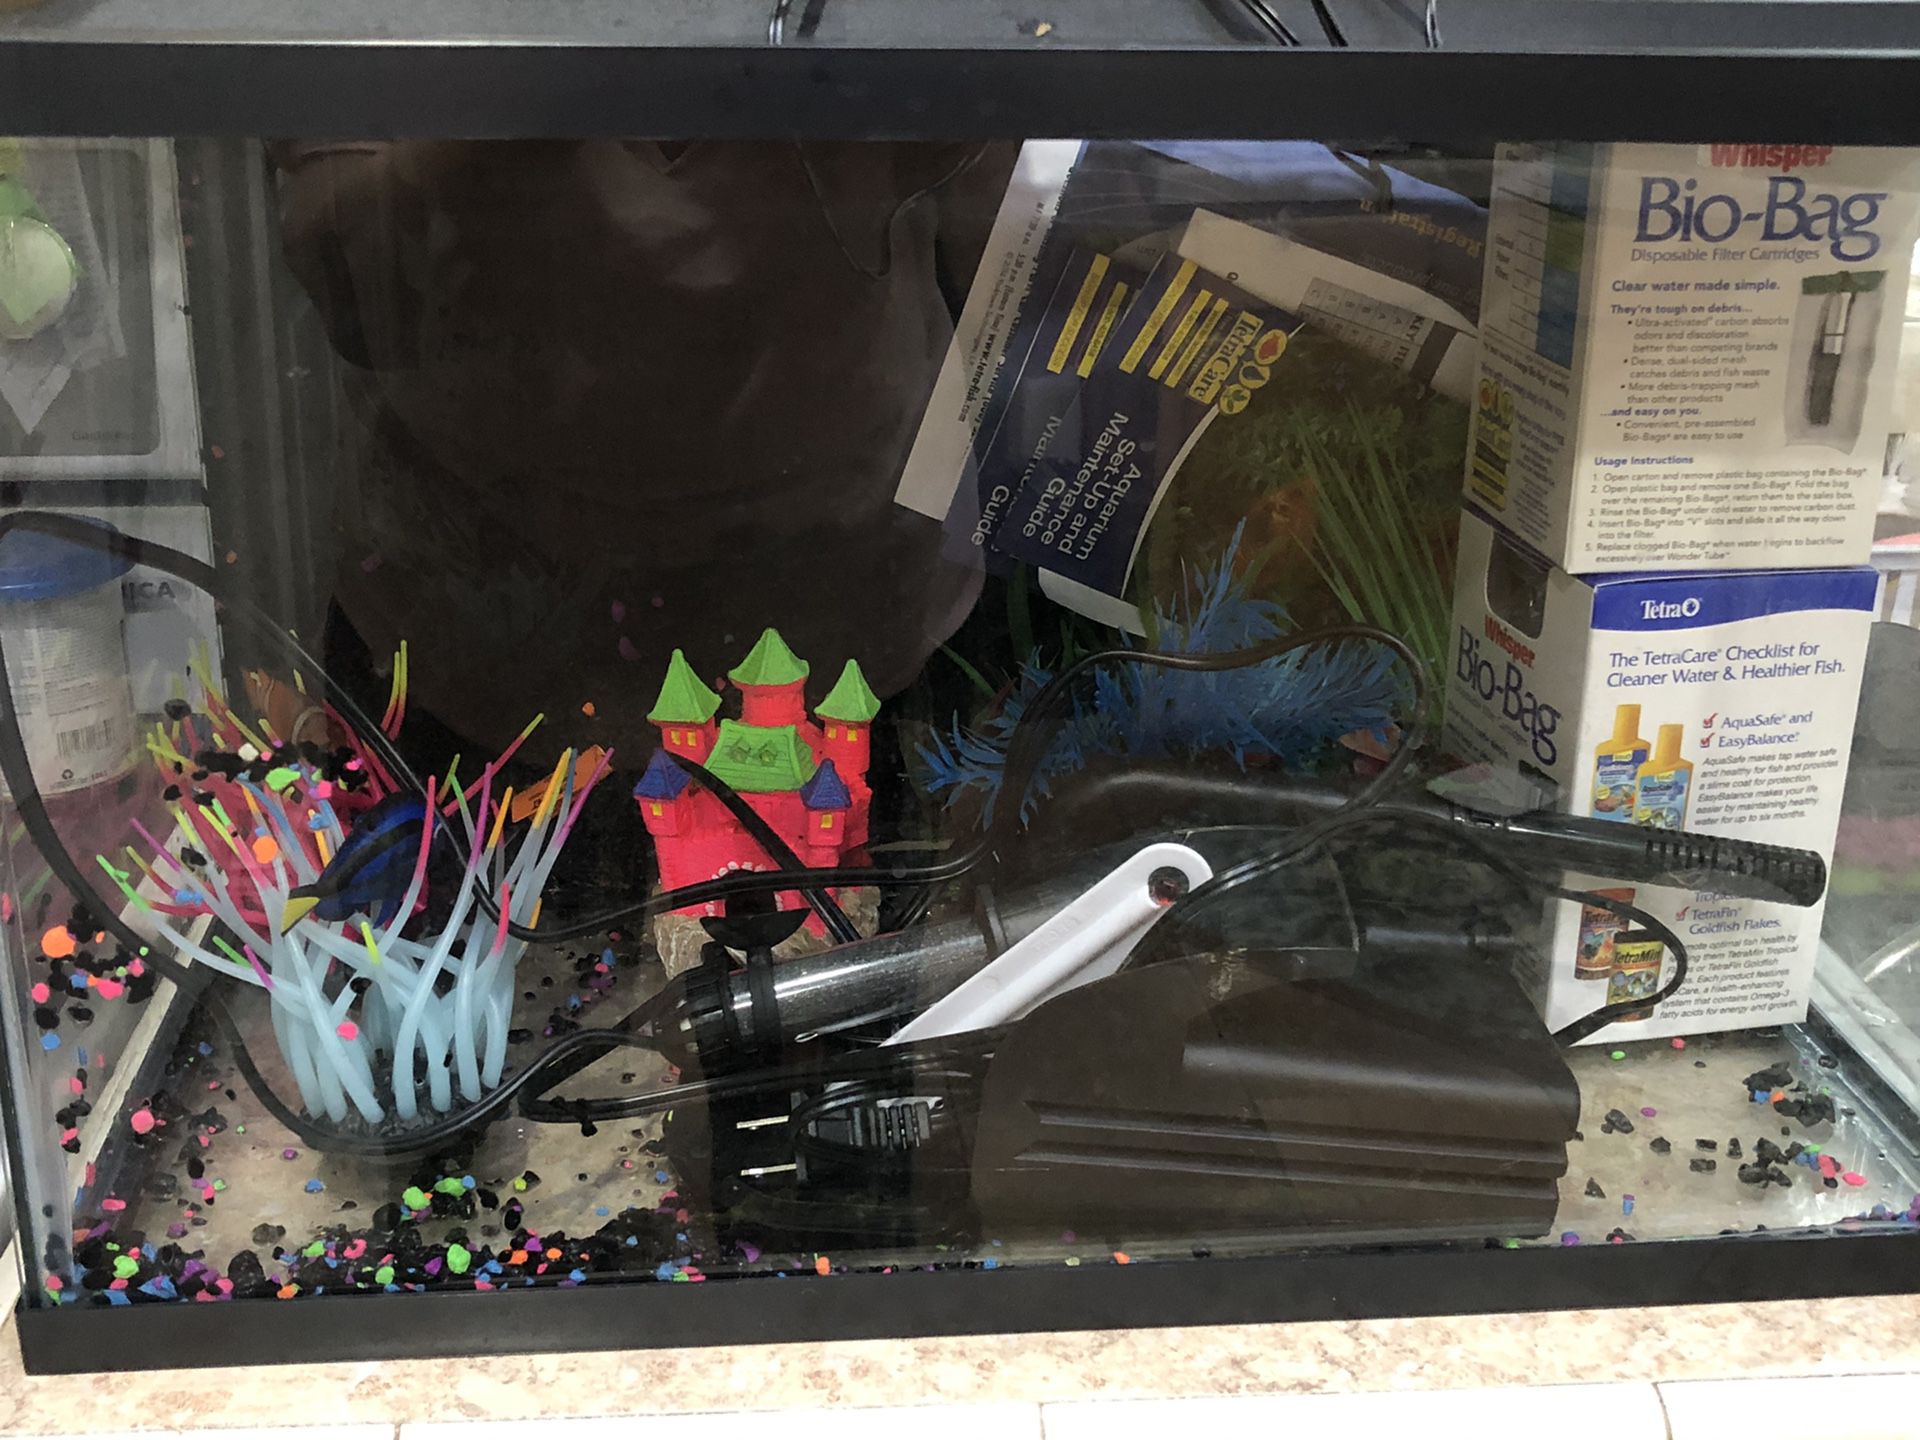 10 gal tank set up for glo fish. Including filter, heater, thermometer, gravel and decorations.